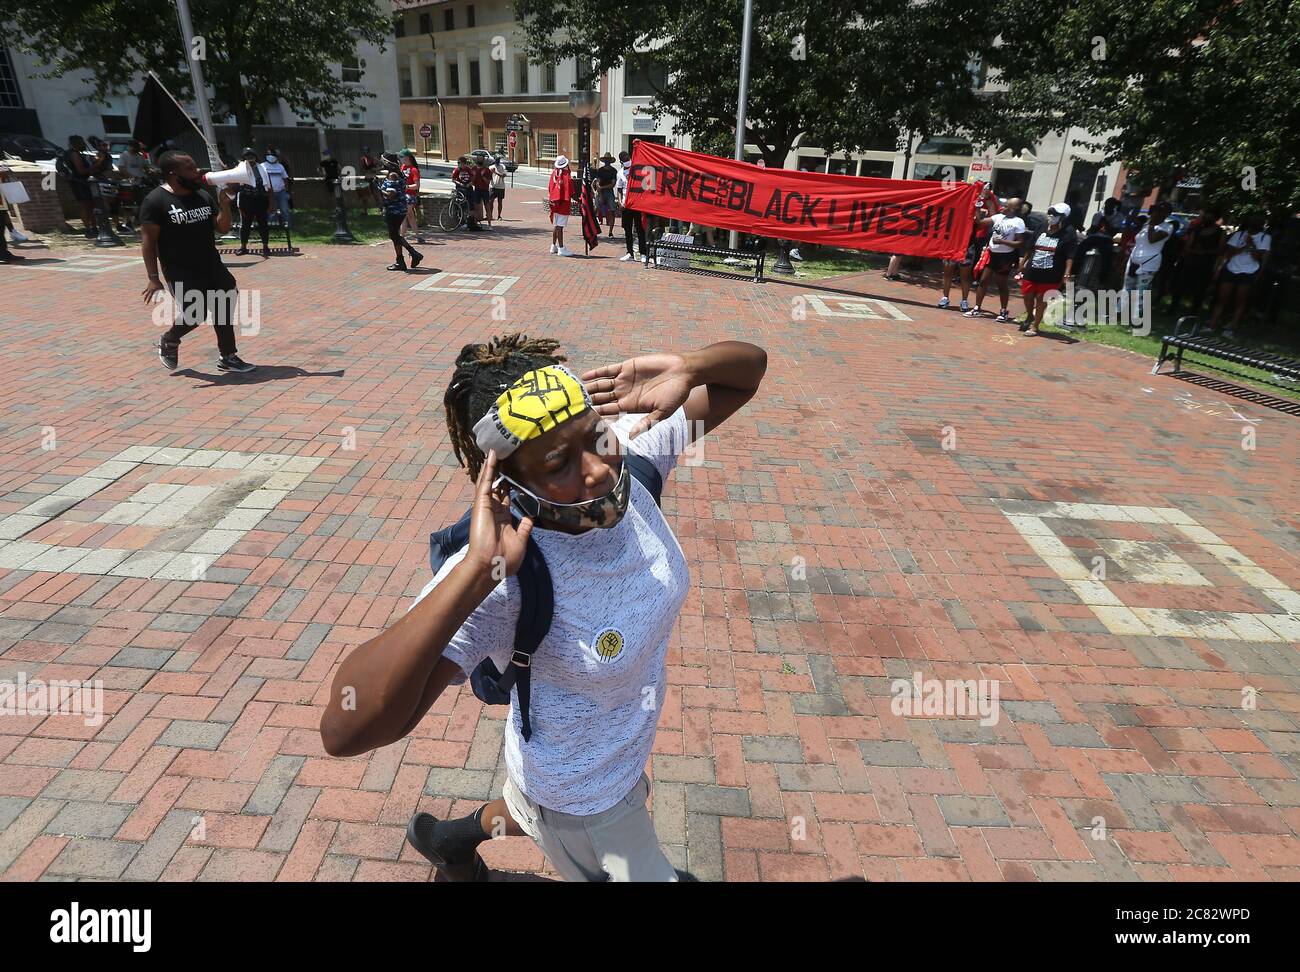 July 20, 2020, Durham, North Carolina, USA: AYANNA MORTON of Durham, NC leads activists in a chant joining tens of thousands around the country protesting systemic racism and economic inequality that has only worsened during the coronavirus pandemic. Credit: ZUMA Press, Inc./Alamy Live News Stock Photo